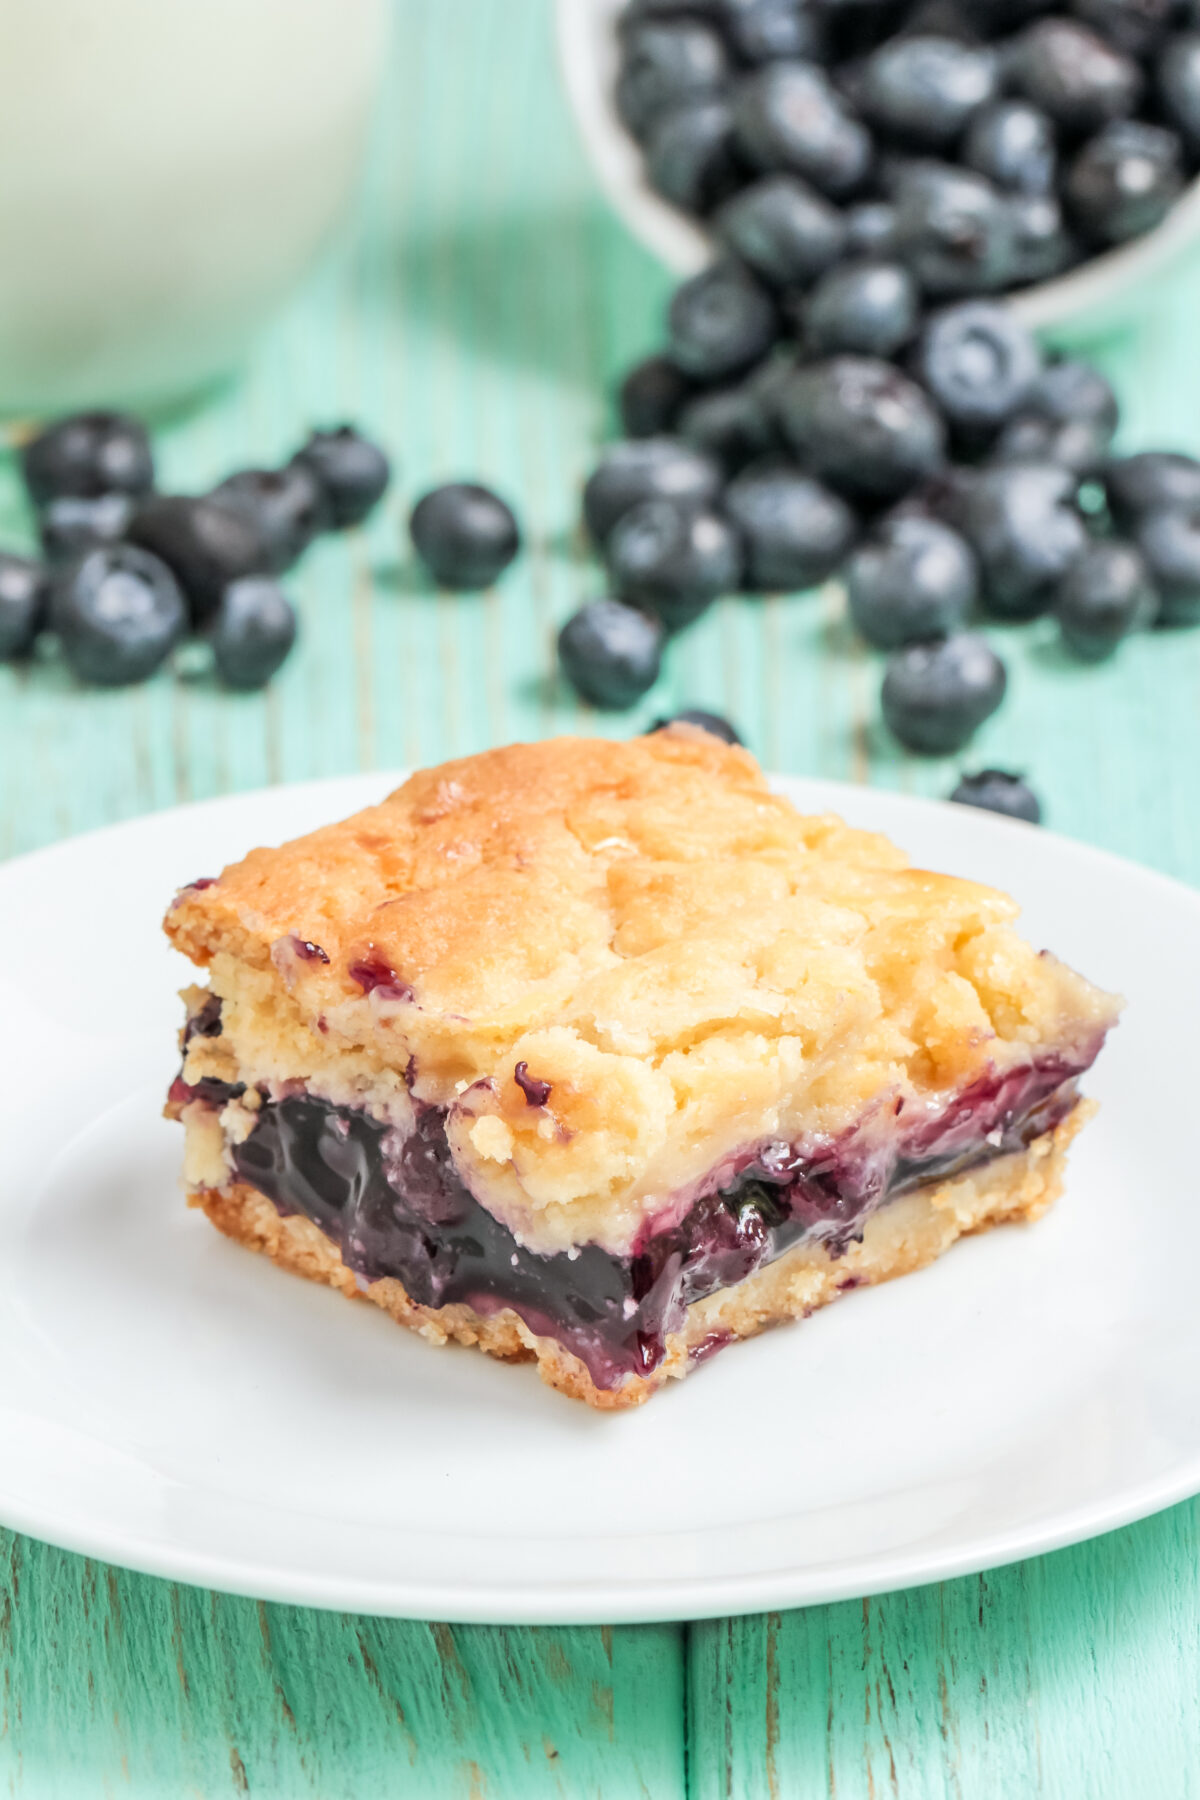 Made with cake mix and pie filling, this blueberry cream cheese bars recipe is a delicious and easy dessert that is perfect for any occasion!